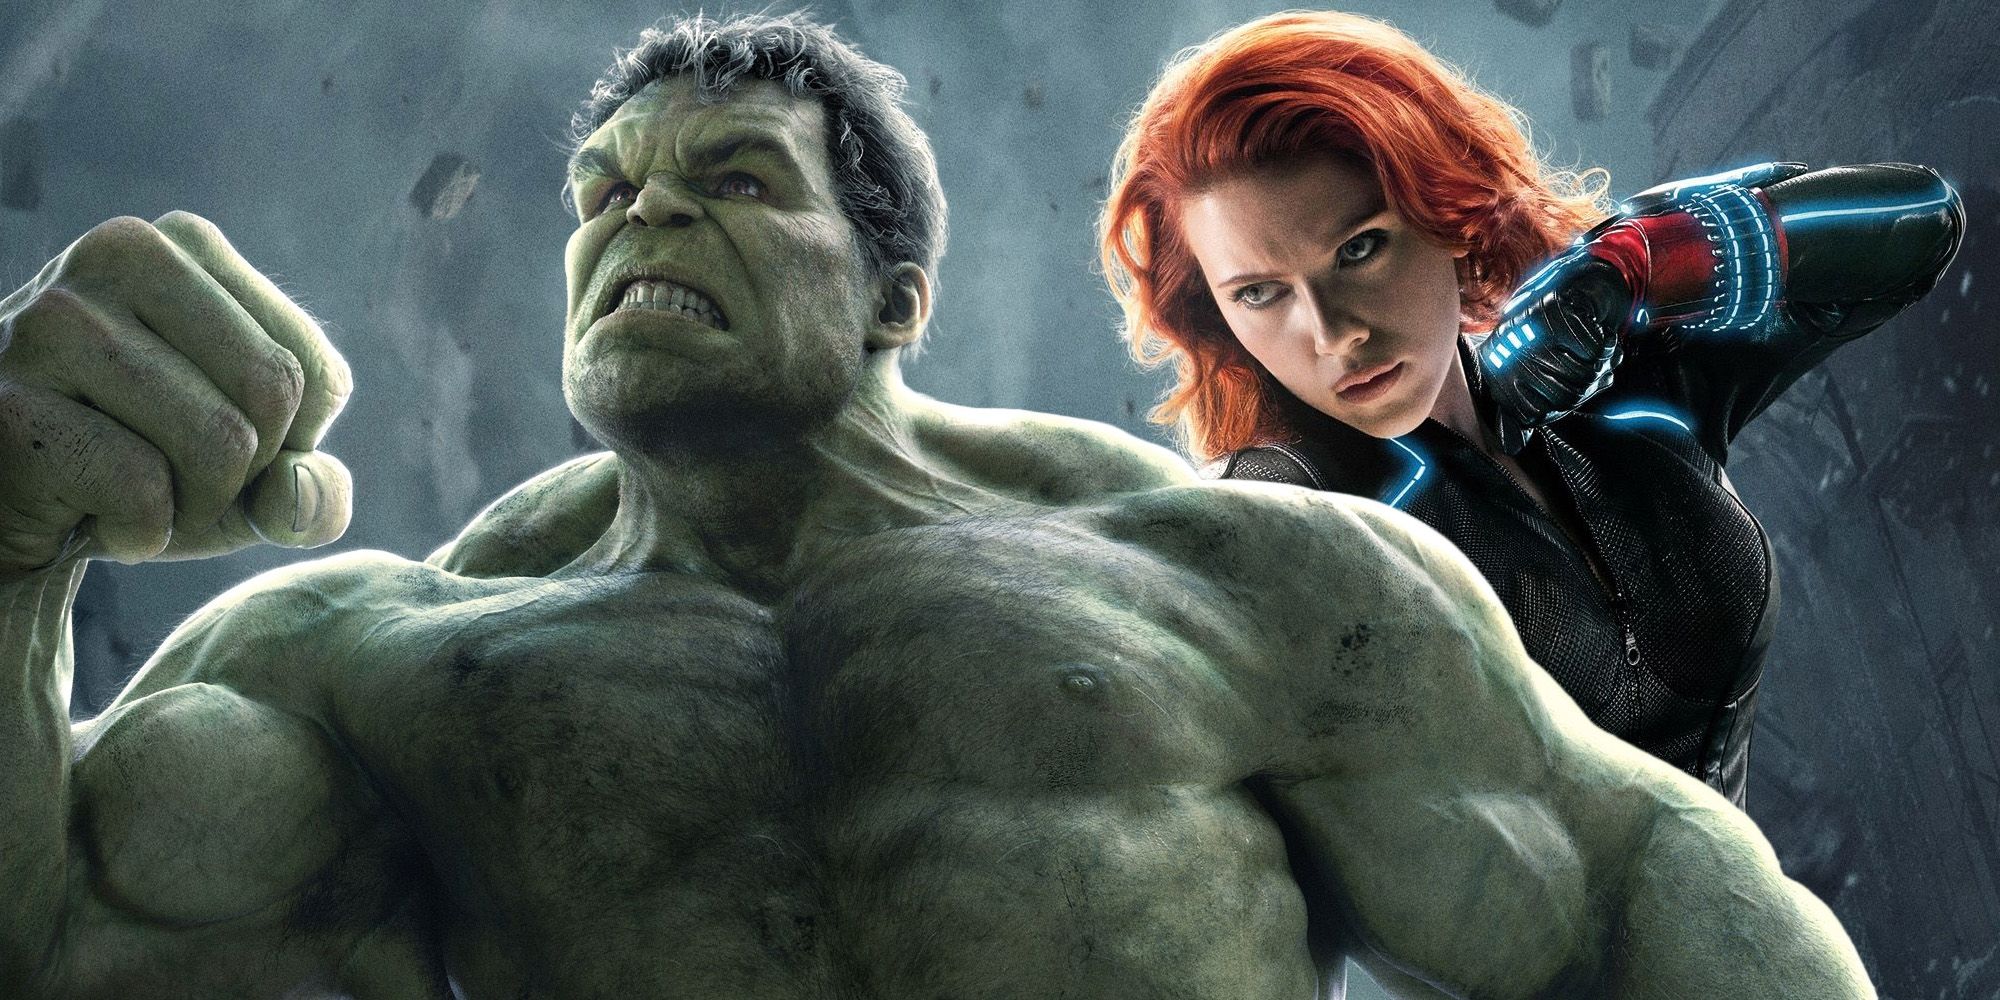 Hulk-and-black-widow-relationship-avengers-age-of-ultron